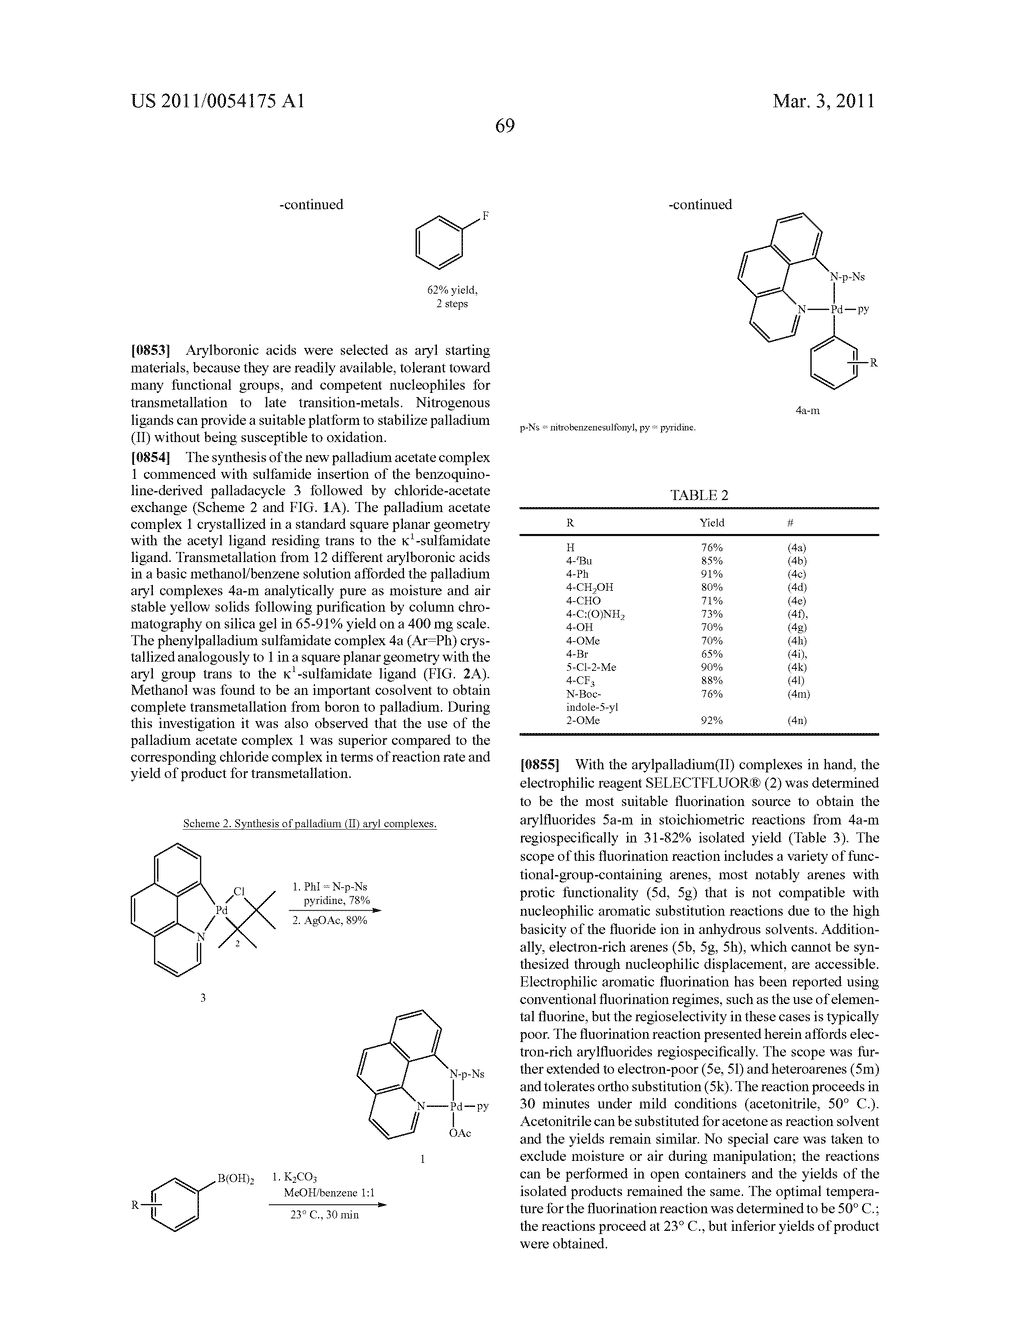 SYSTEM FOR FLUORINATING ORGANIC COMPOUNDS - diagram, schematic, and image 88